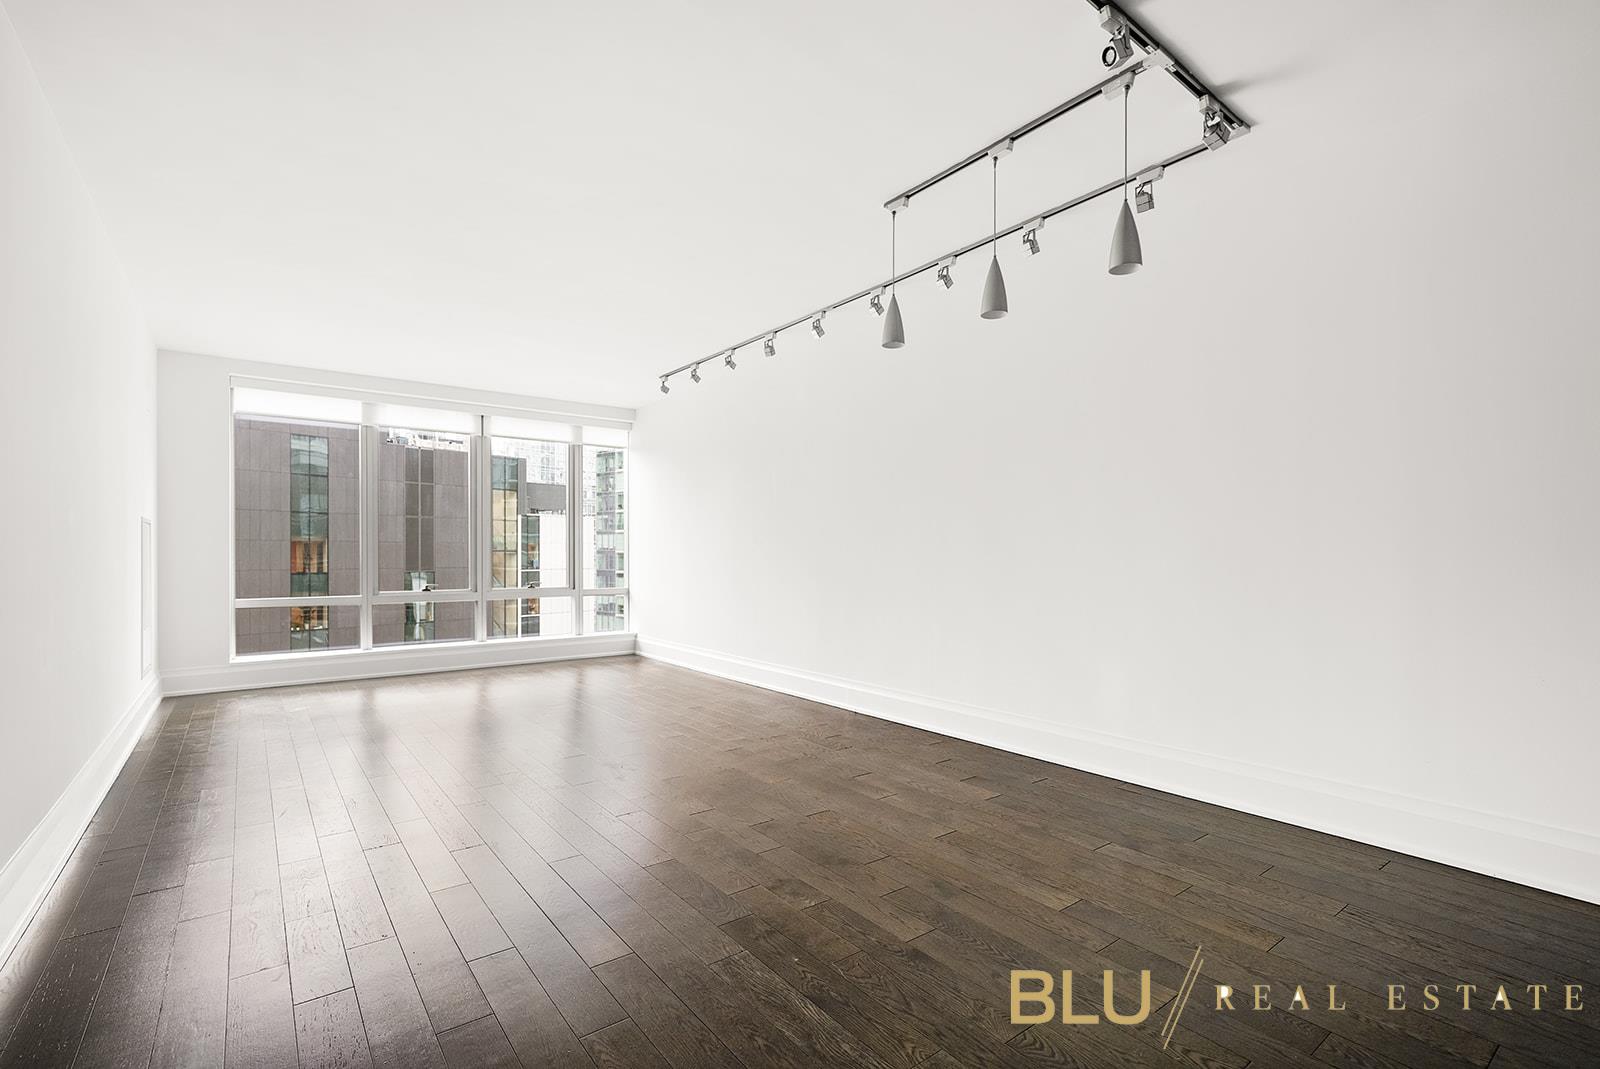 50 Riverside Boulevard 12-G, Lincoln Square, Upper West Side, NYC - 2 Bedrooms  
2 Bathrooms  
4 Rooms - 